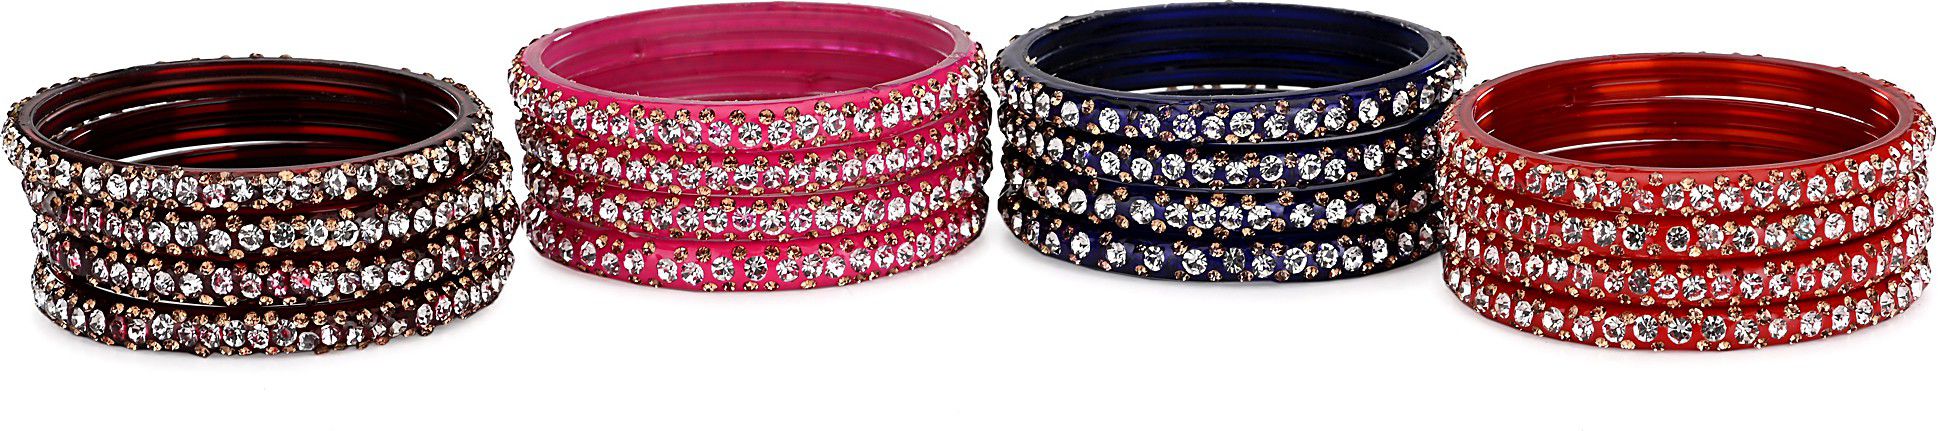     			Somil Designer Bridal Glass Bangle Set For Party Marriage, And Function, Ornamented, Colorful -S17_2.6